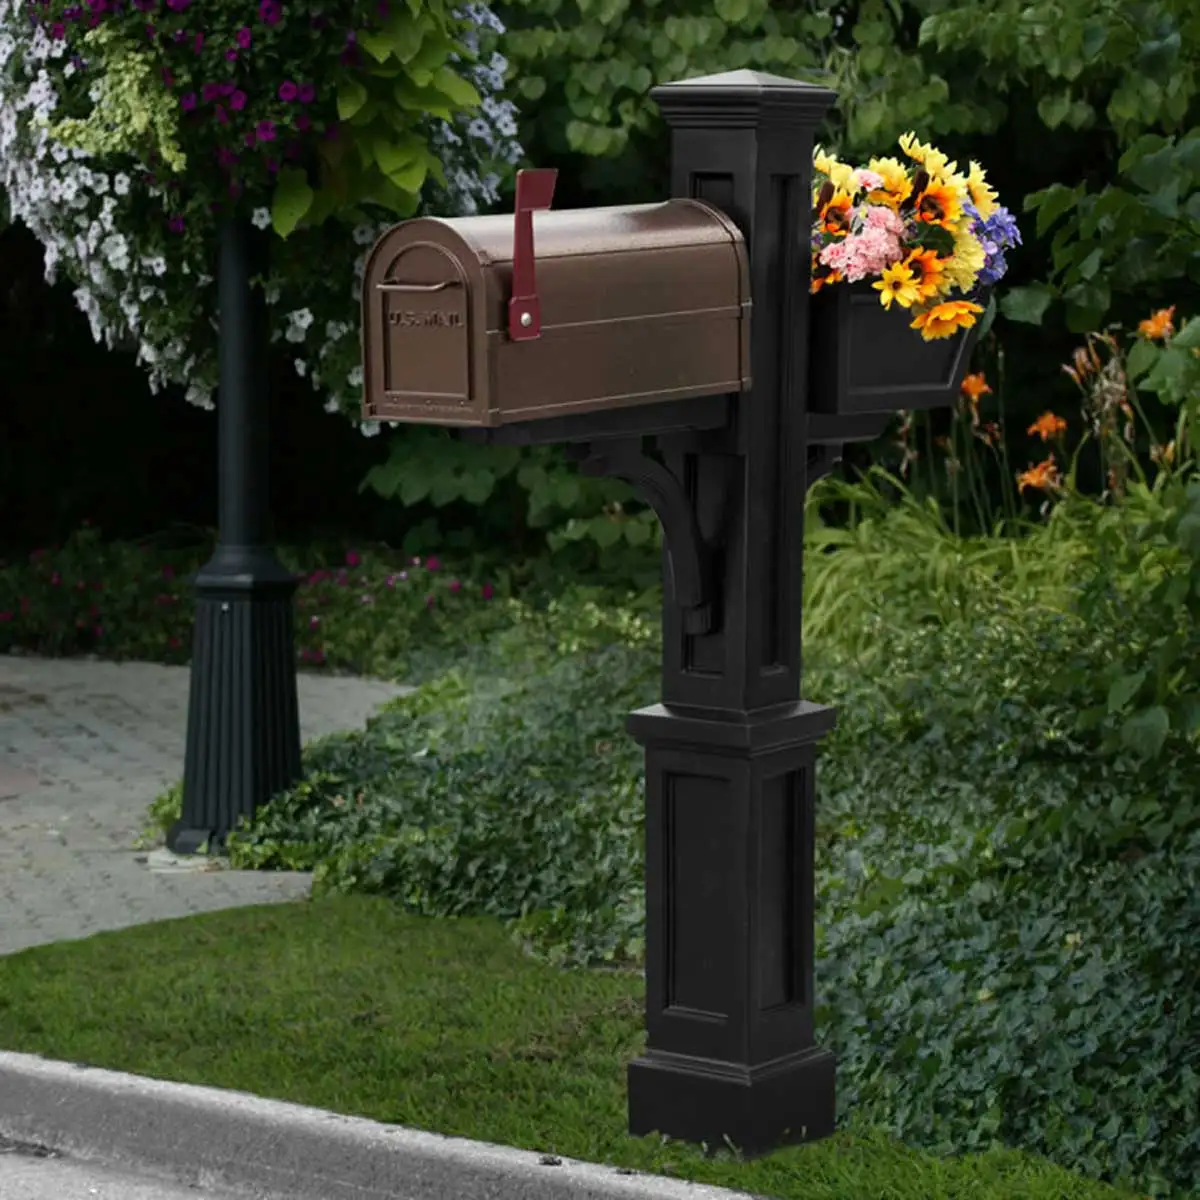 wholesale solar mailbox/ letter box with led house number light